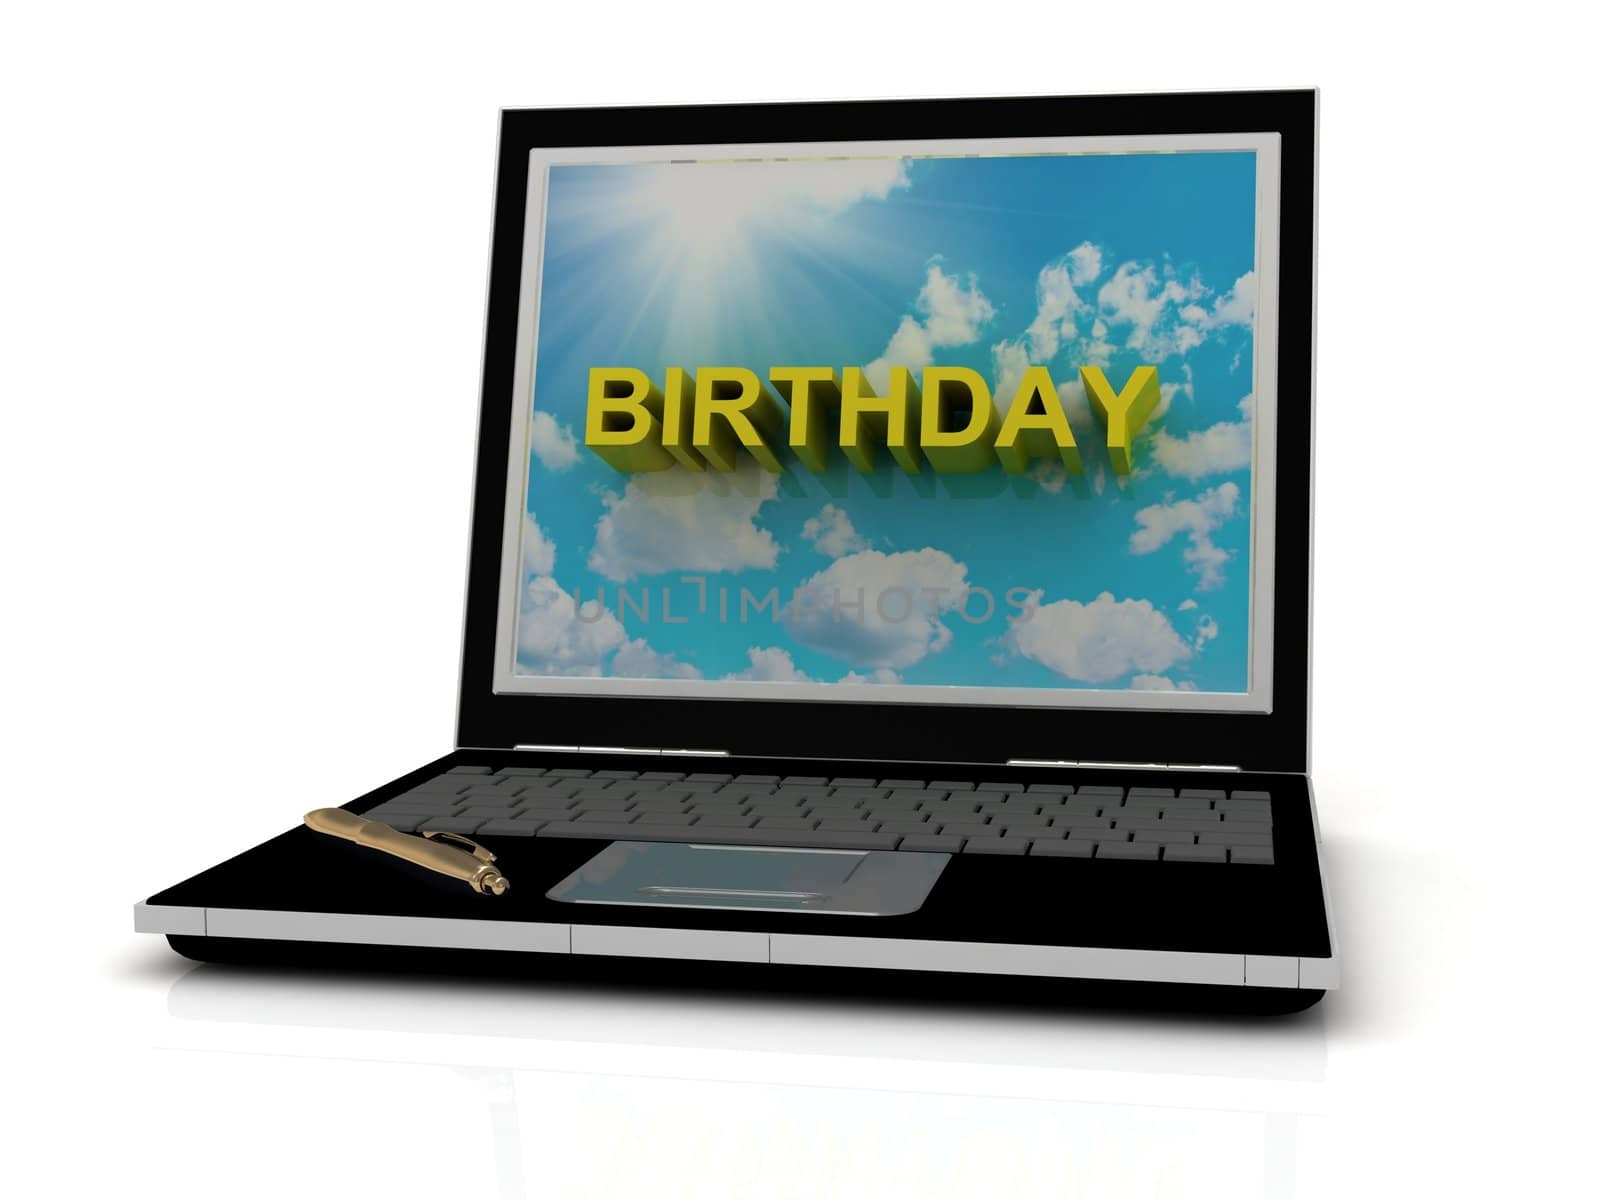 BIRTHDAY sign on laptop screen by GreenMost